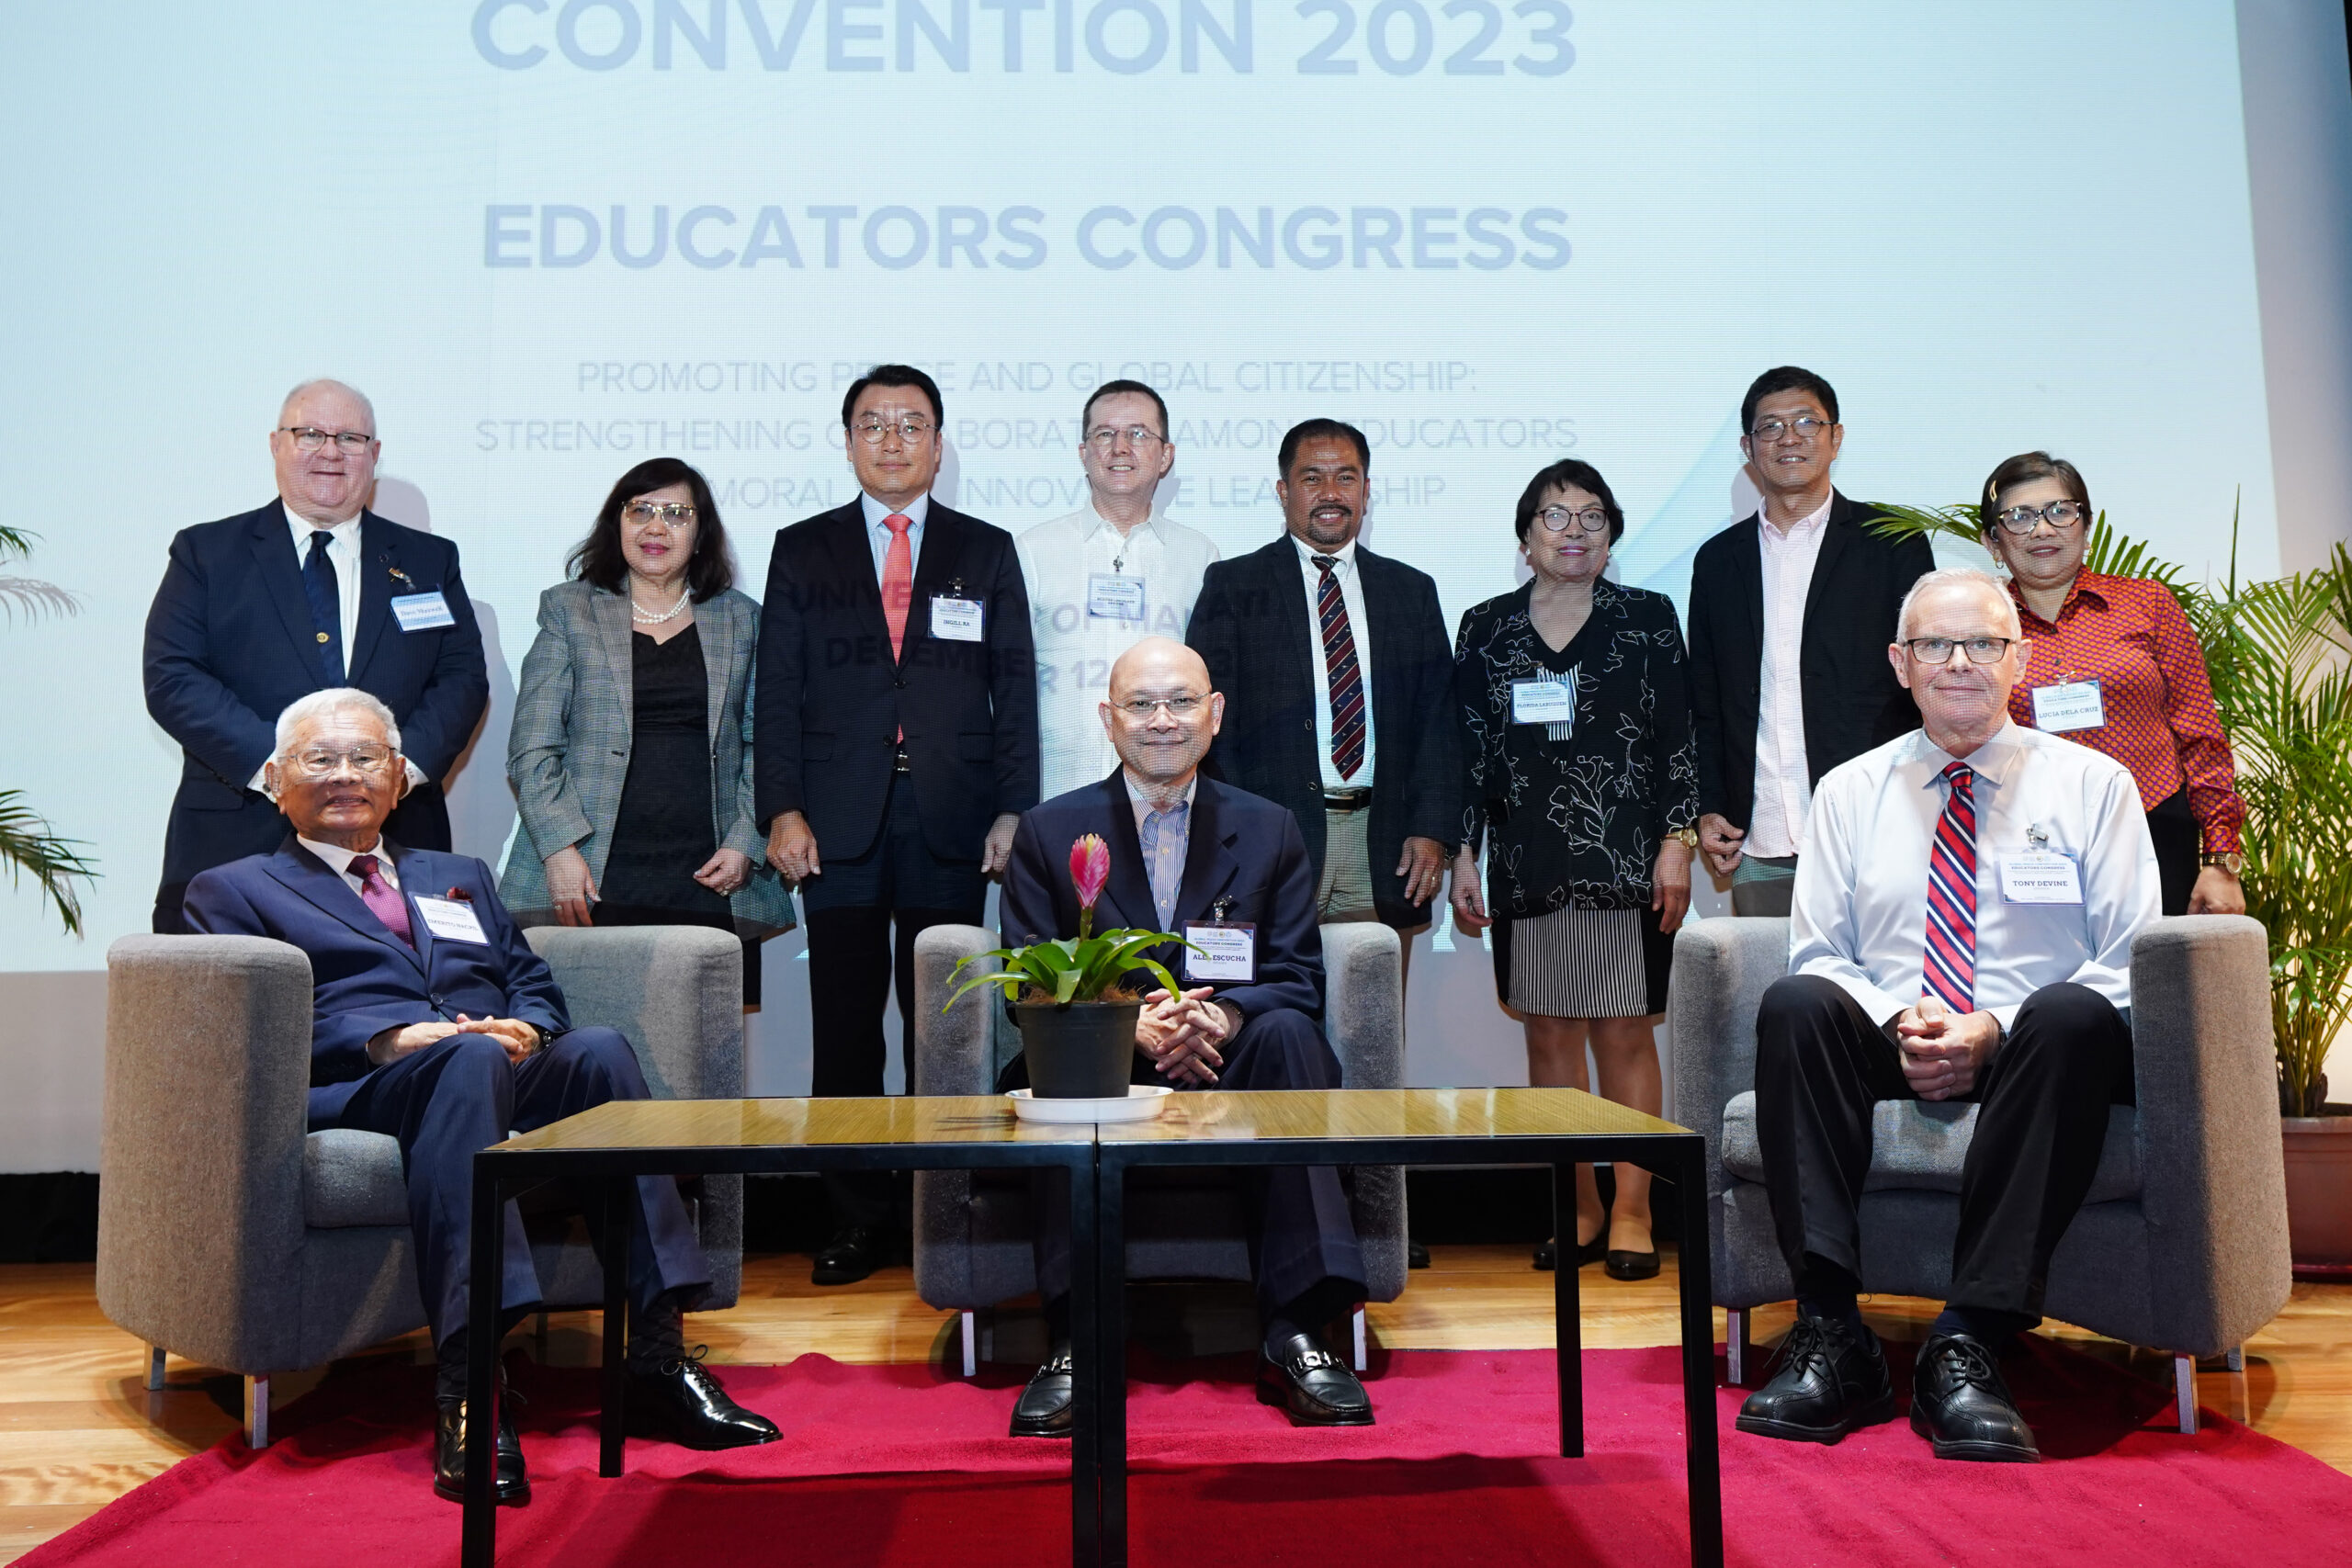 Group photo of contributors during the sessions at the Educators Congress